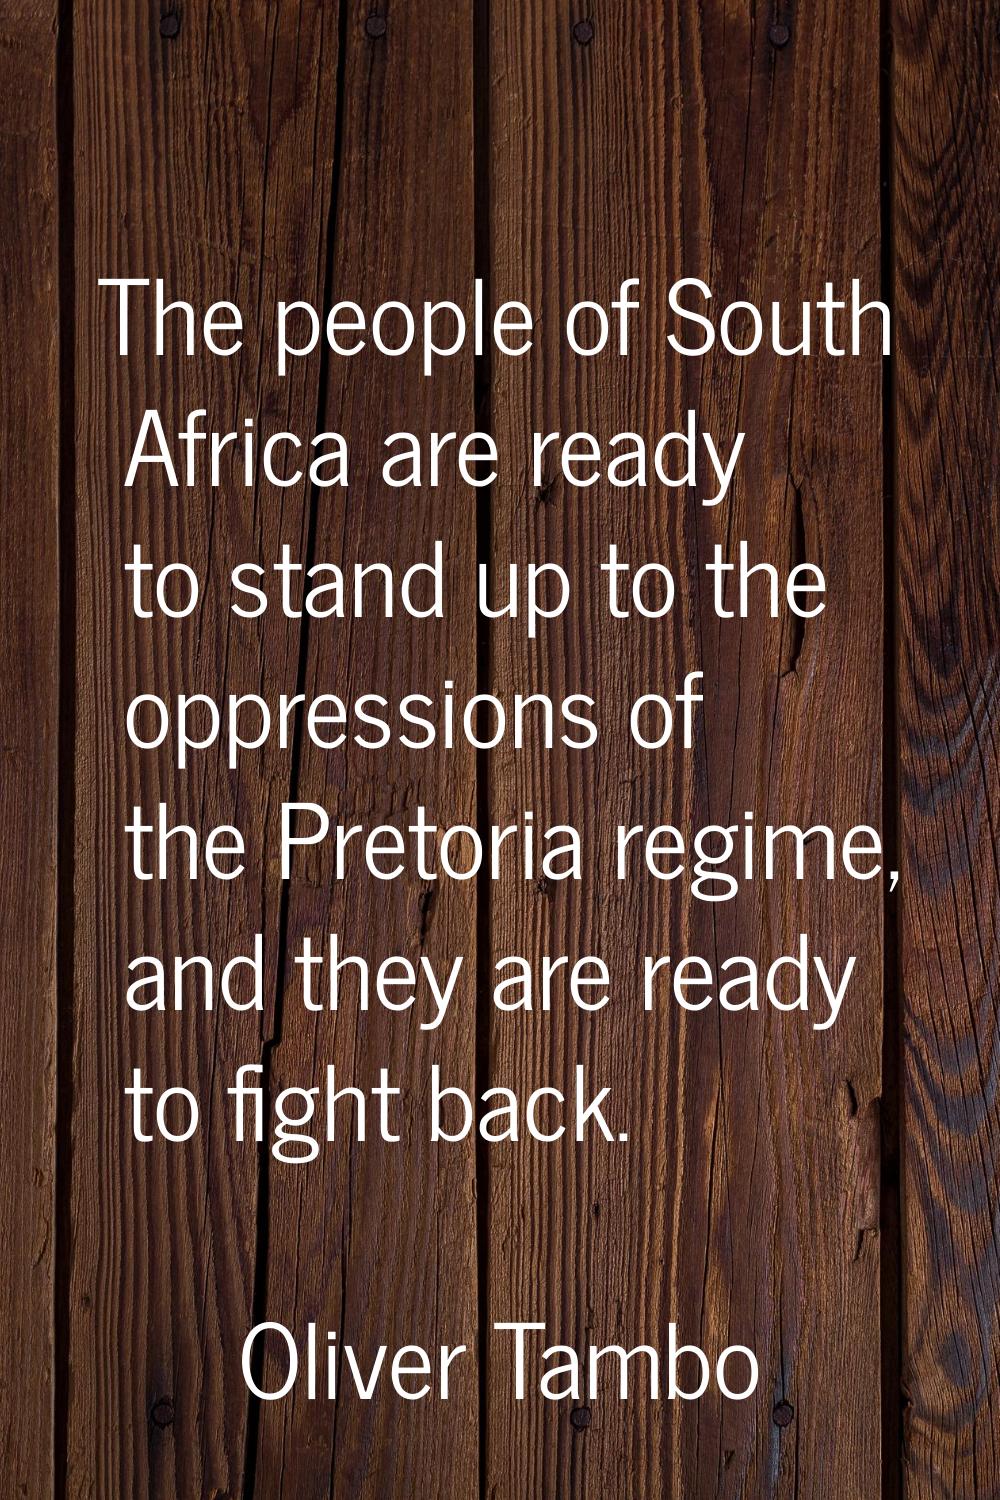 The people of South Africa are ready to stand up to the oppressions of the Pretoria regime, and the